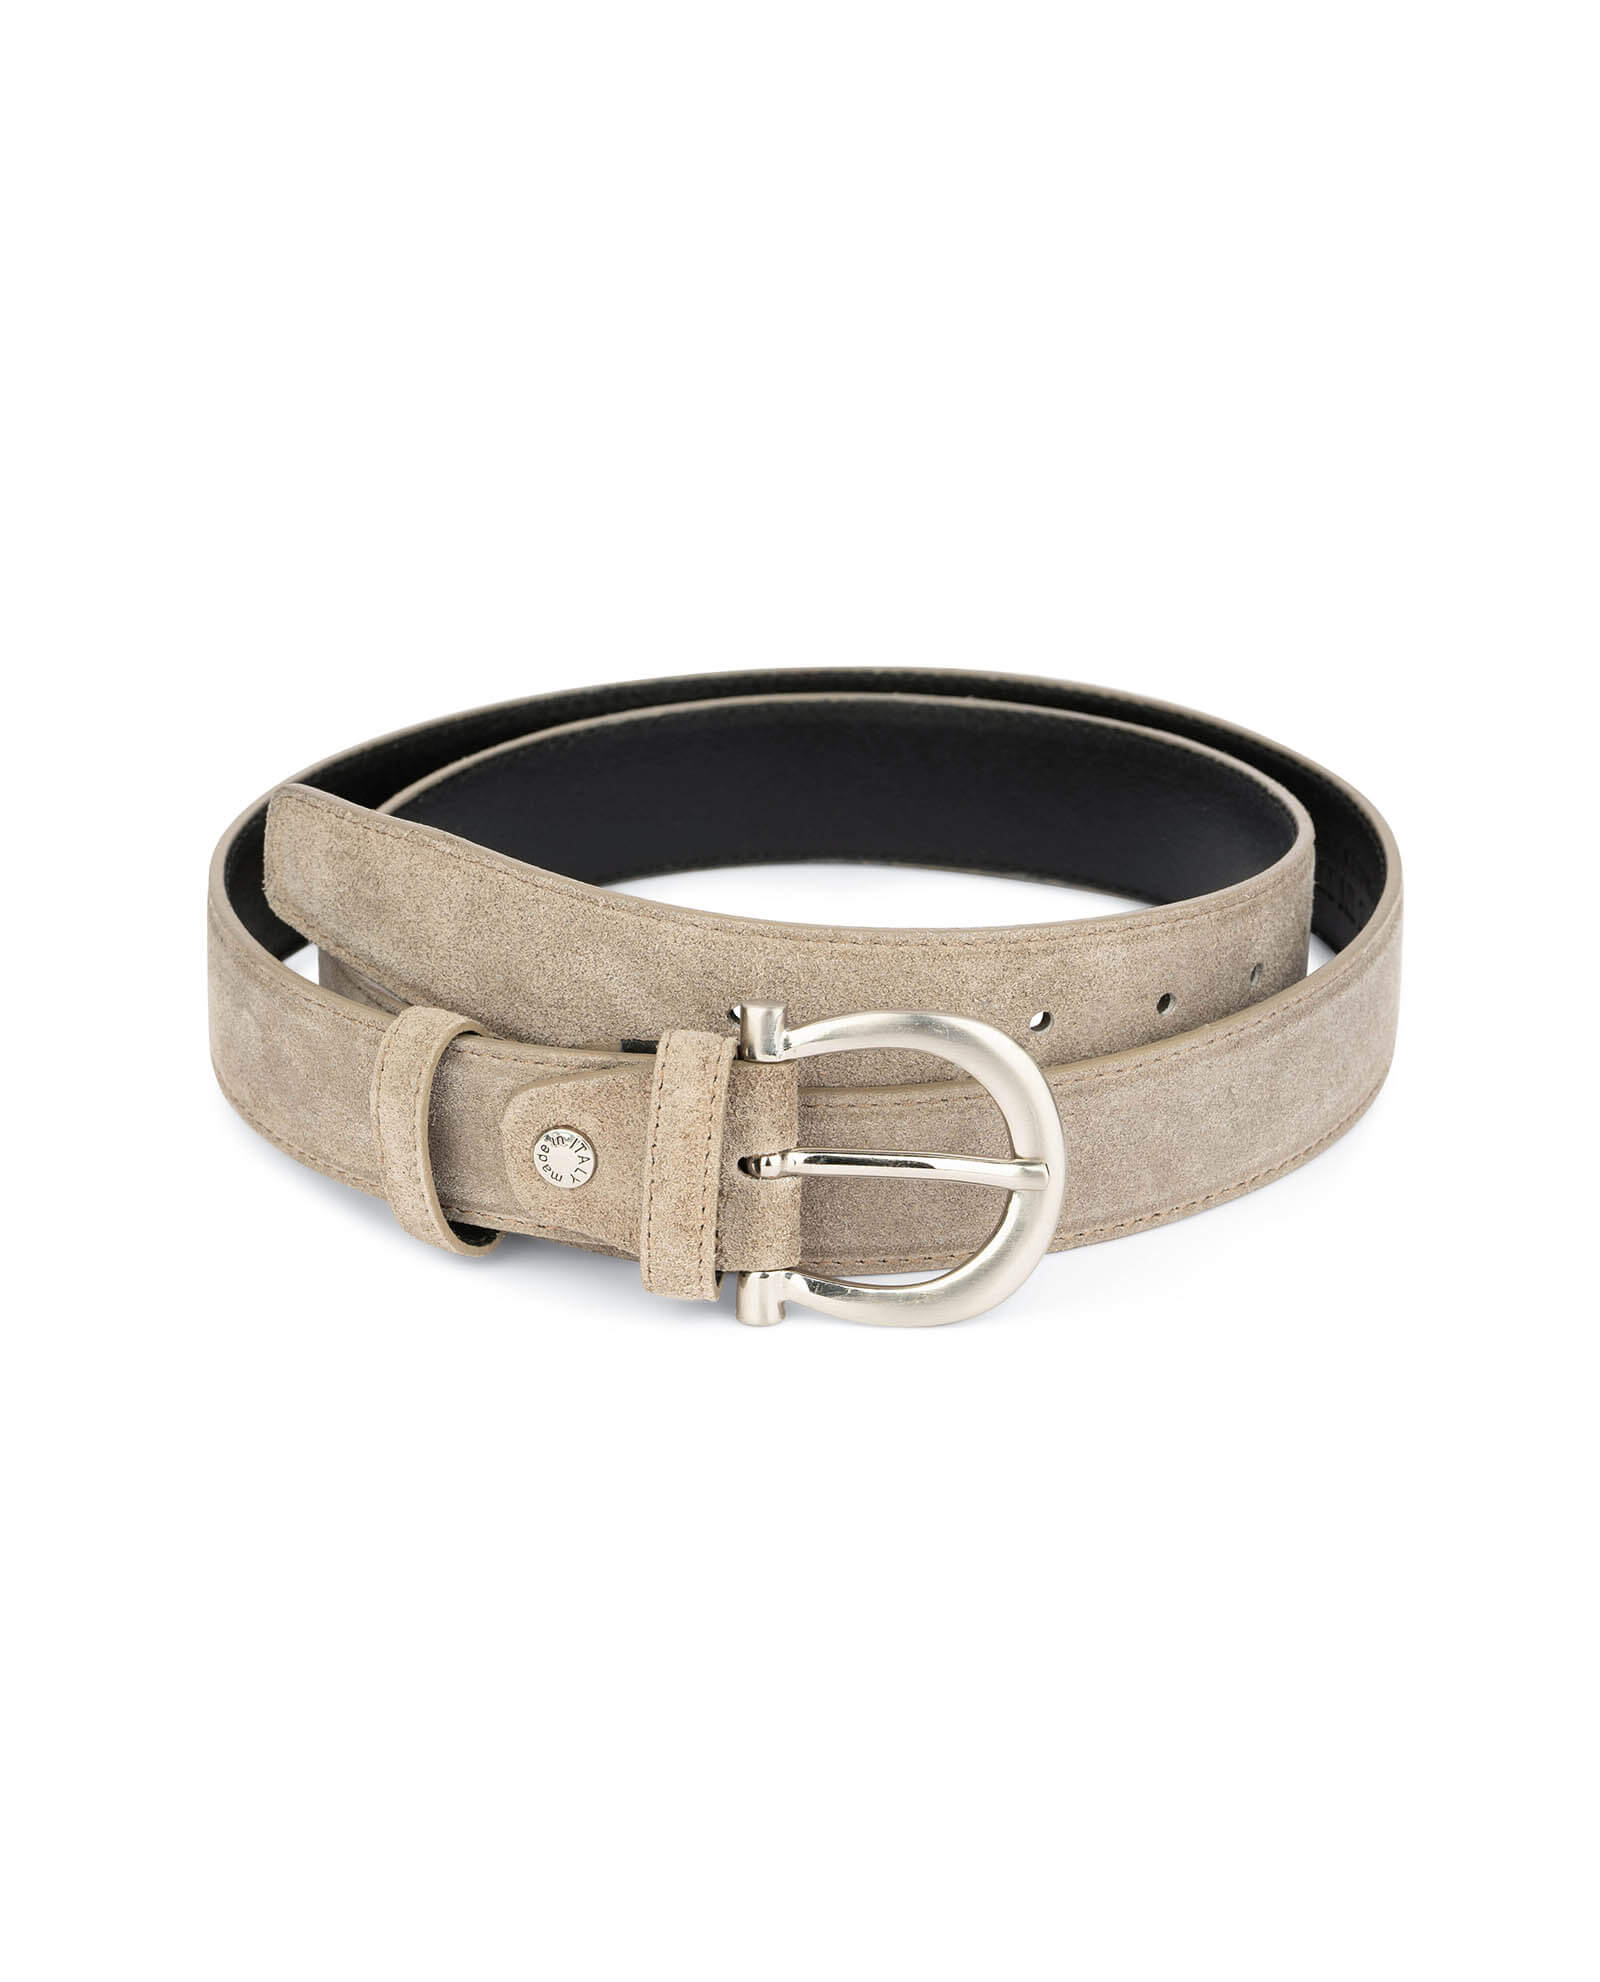 Womens Taupe Belt With Italian Buckle